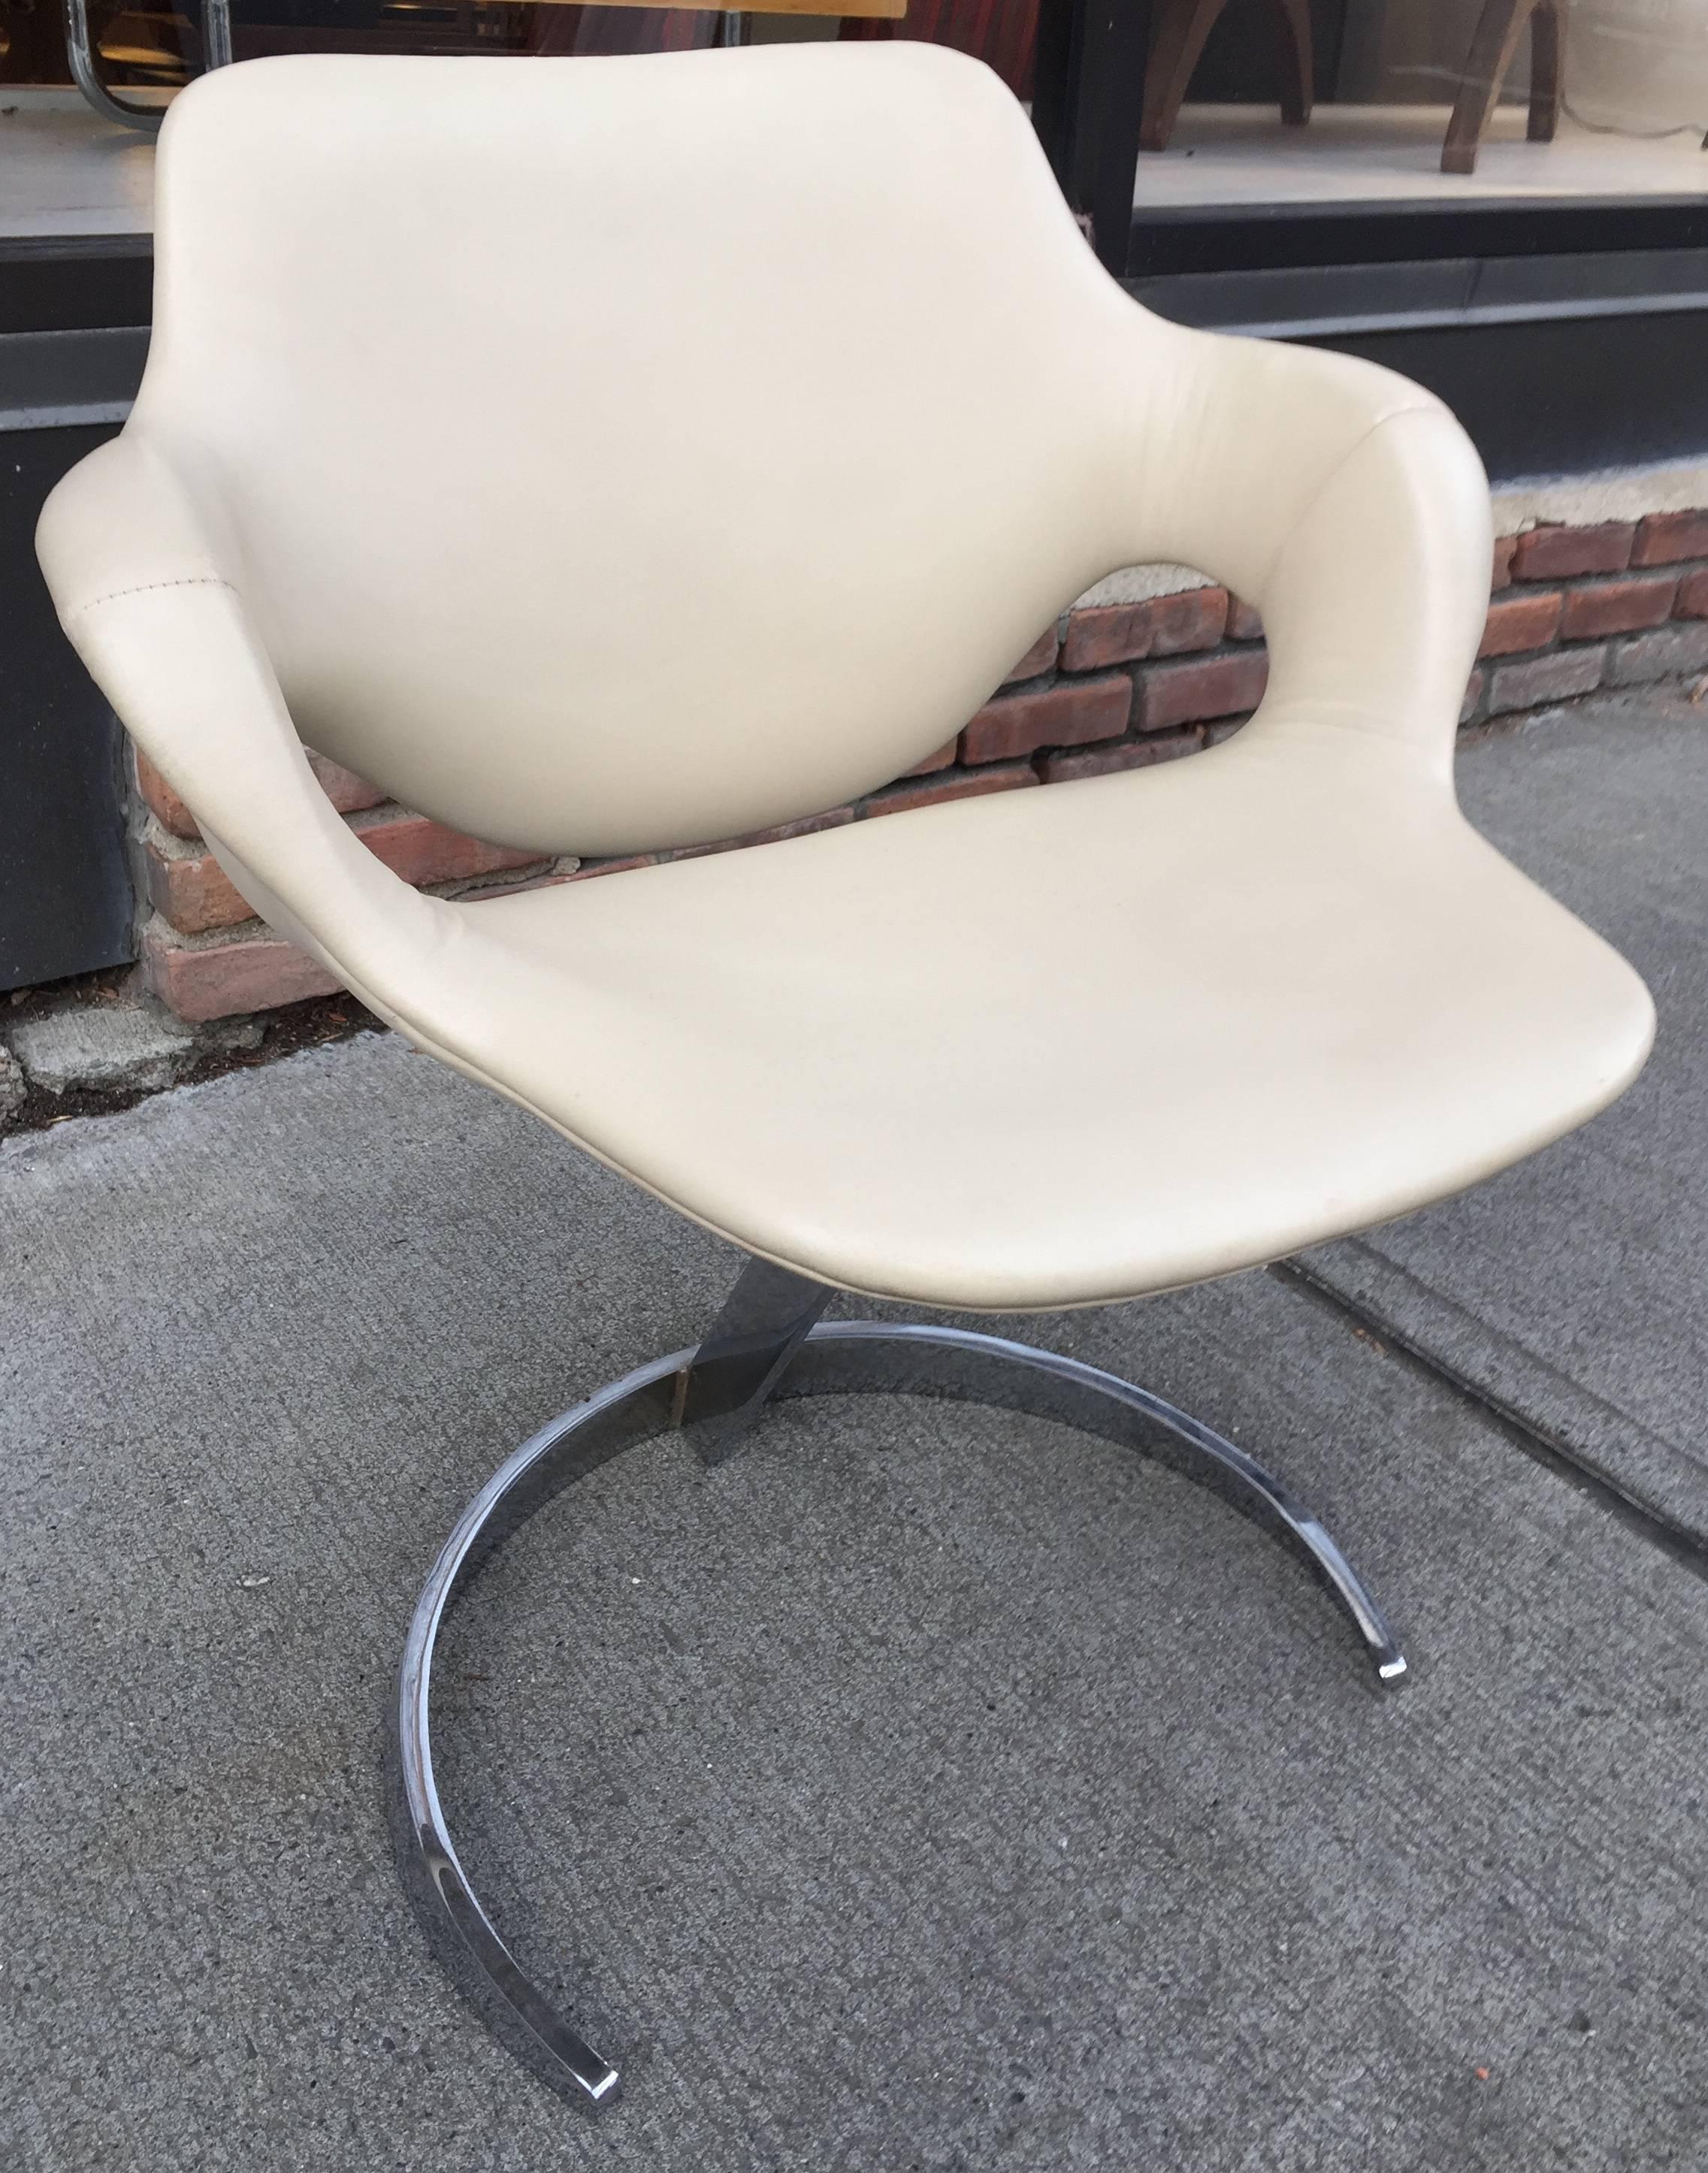 Spage age chromed steel and cream skai upholstered chair. As comfortable as it is chic.